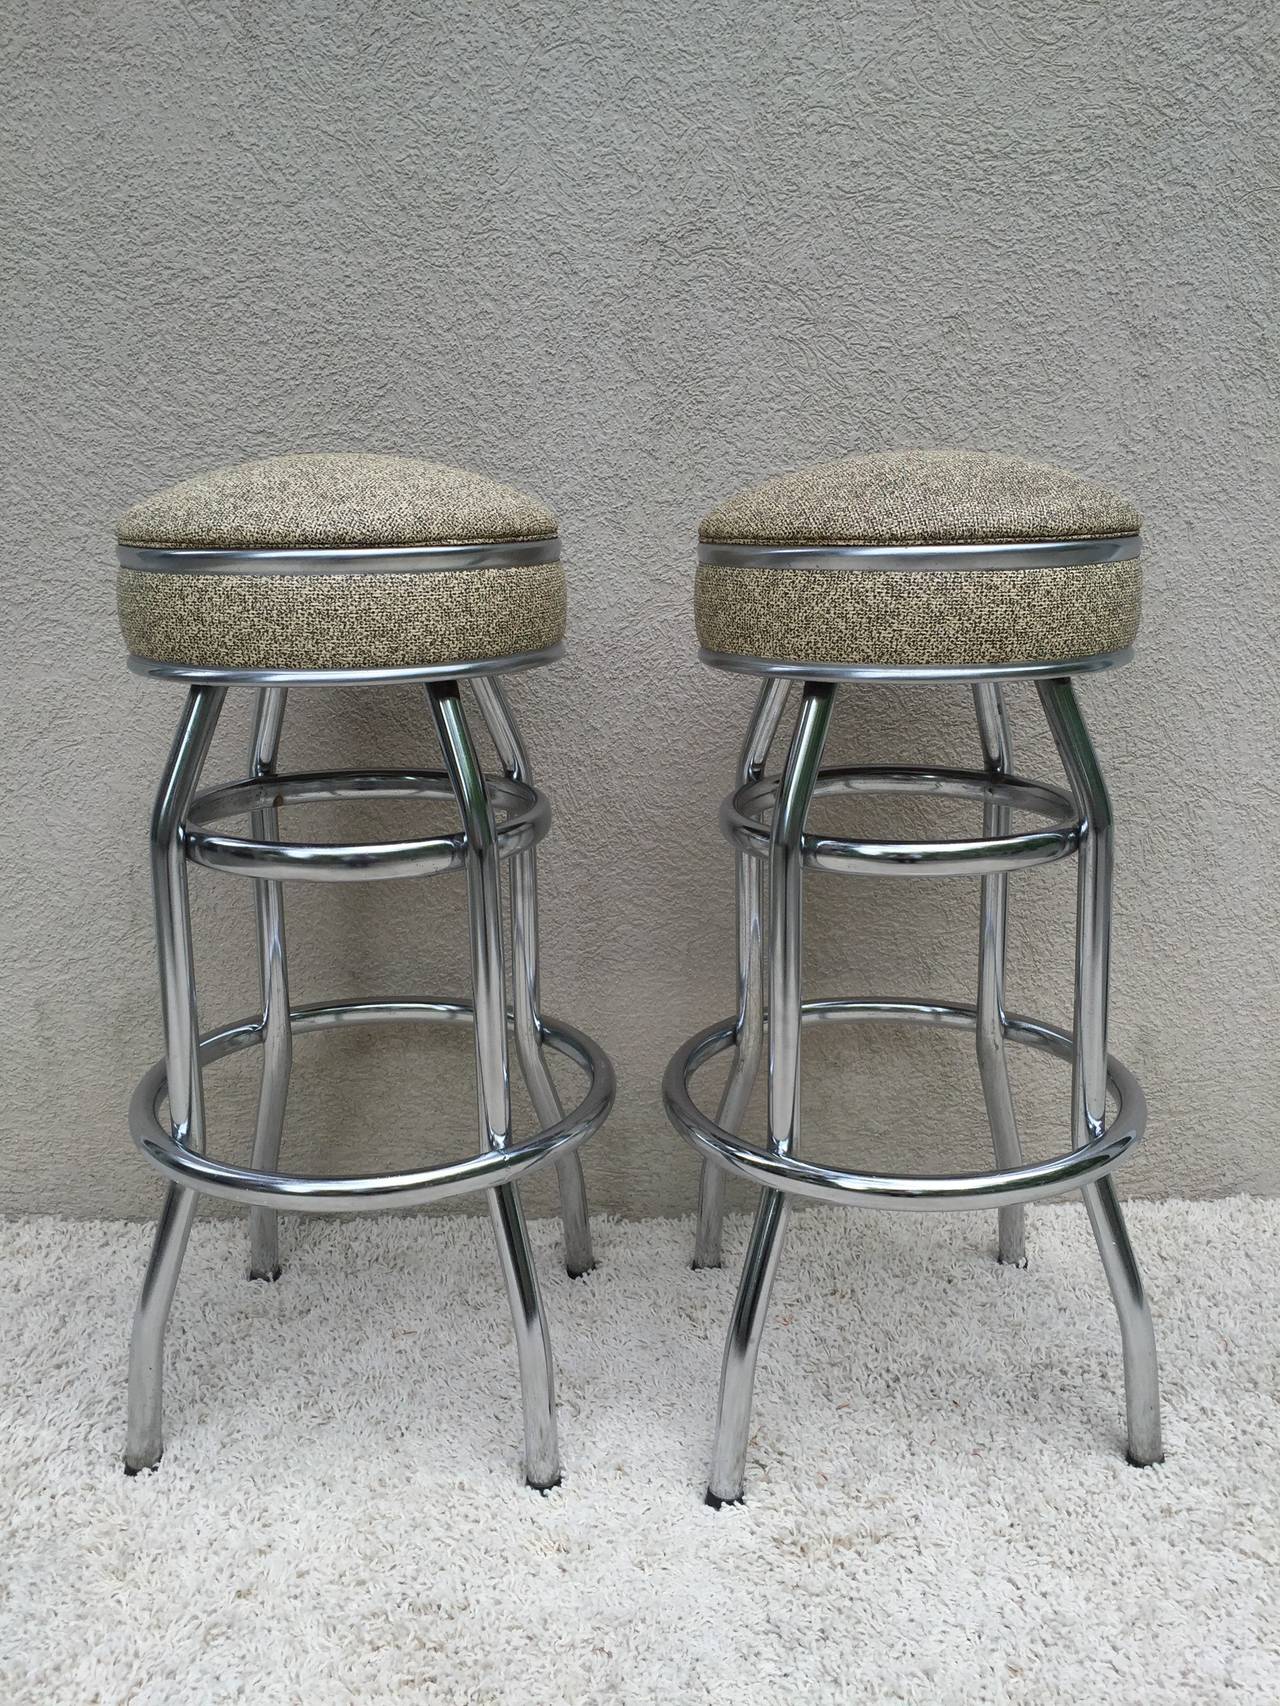 Pair of Art Deco swivel bar stools, with all original black and off white naugahyde, in all original condition.